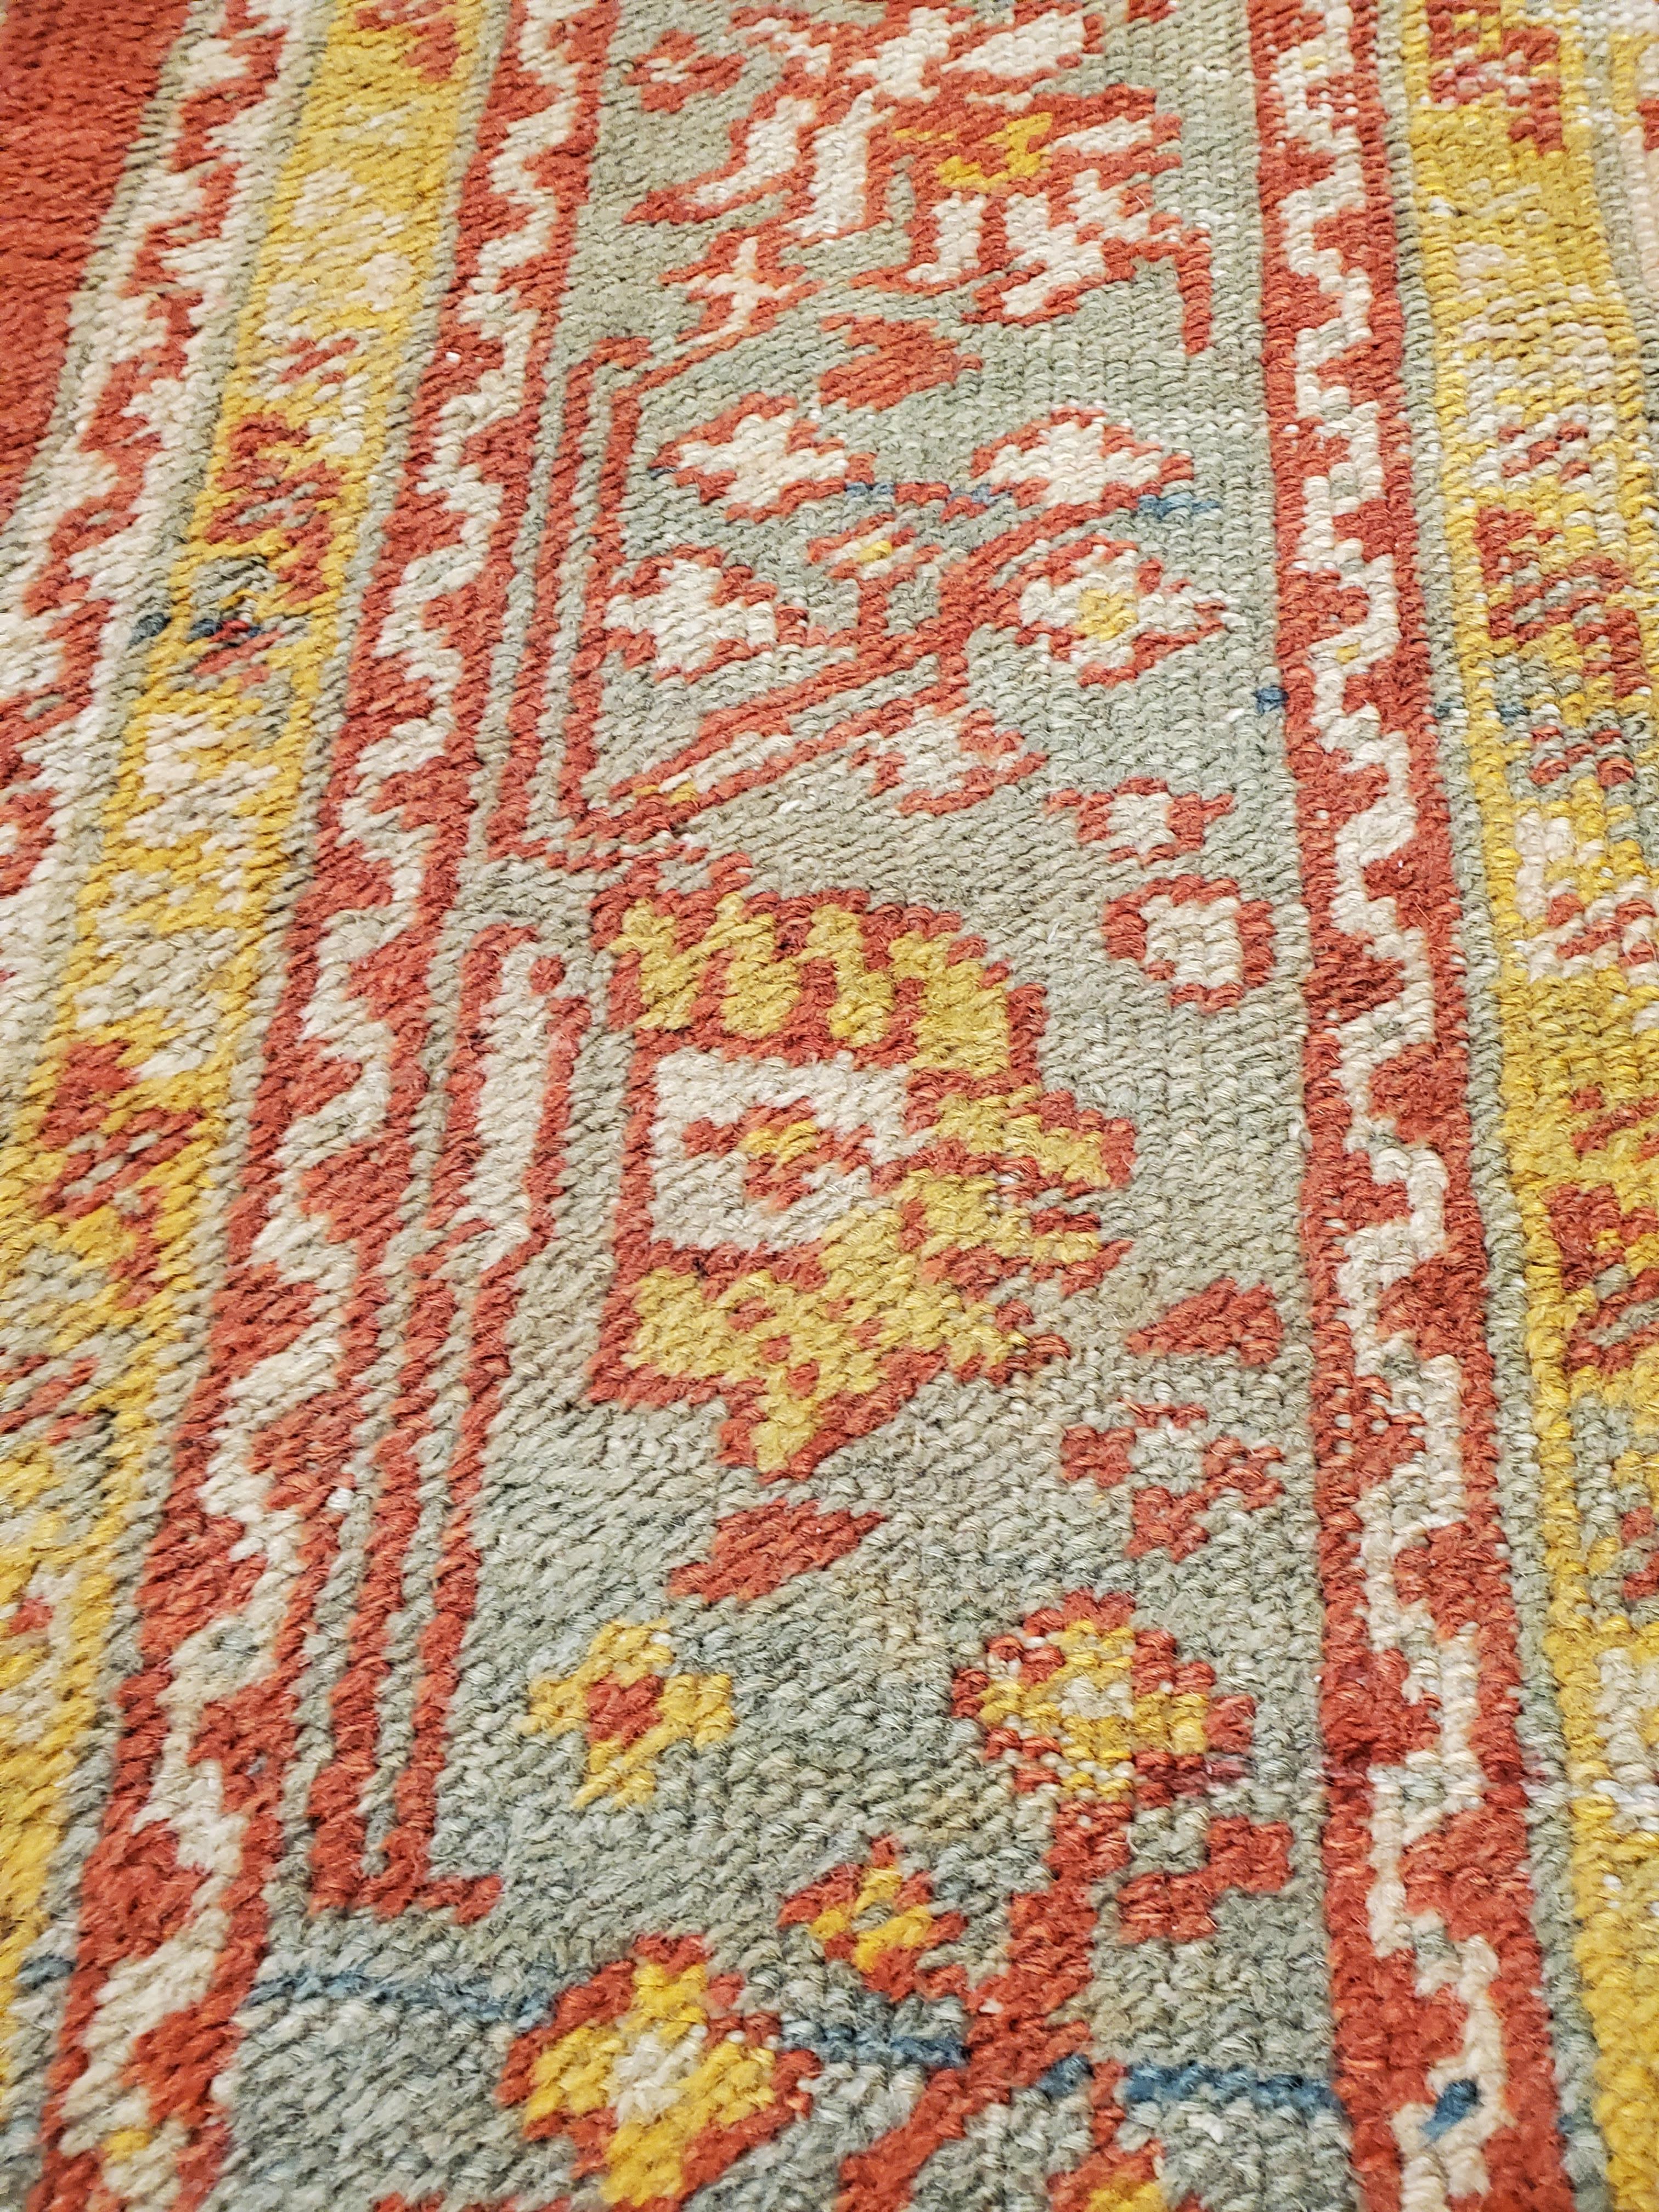 Antique Oushak Carpet, Oriental Rug, Handmade Rug Saffron, Light Blue and Coral In Excellent Condition For Sale In Port Washington, NY